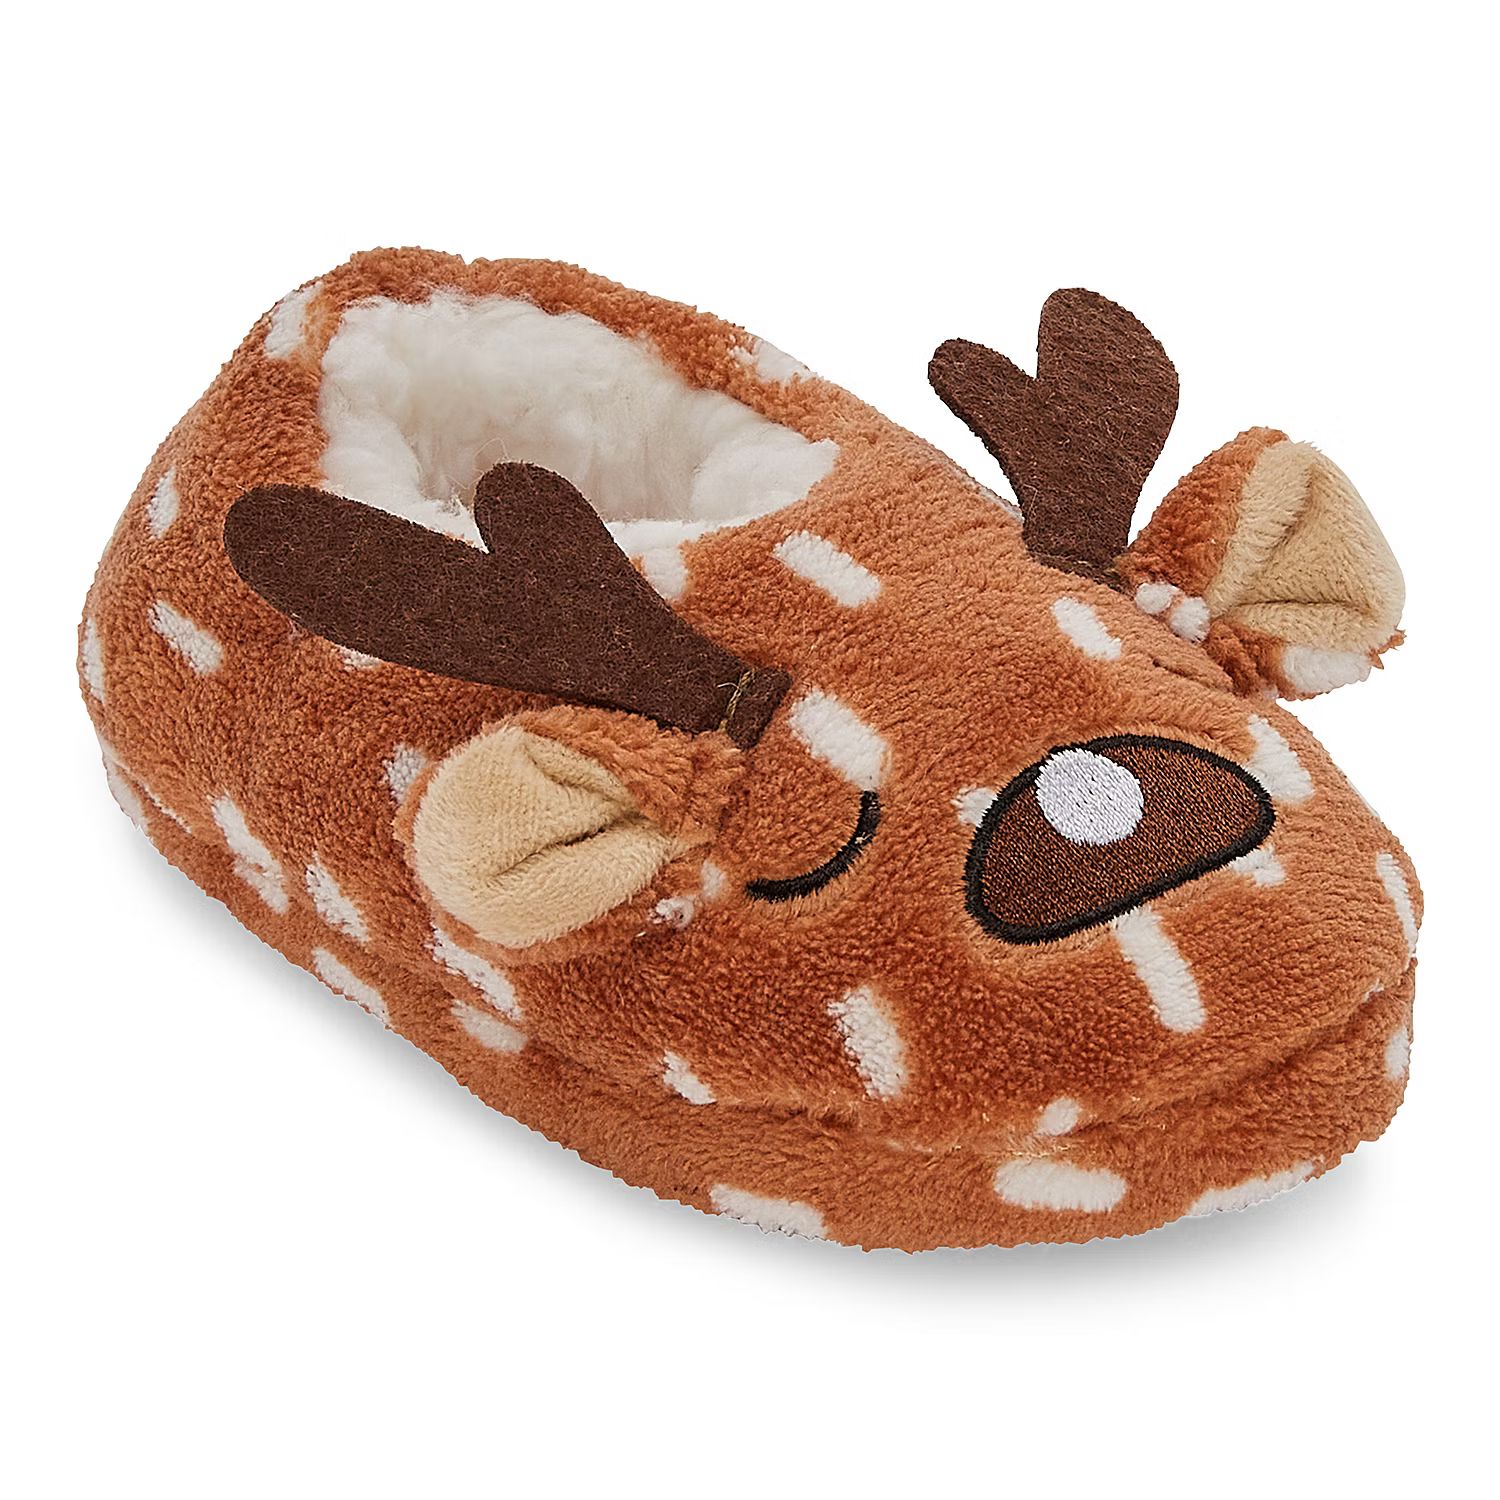 North Pole Trading Co. Reindeer Family Unisex Toddler Slip-On Slippers | JCPenney